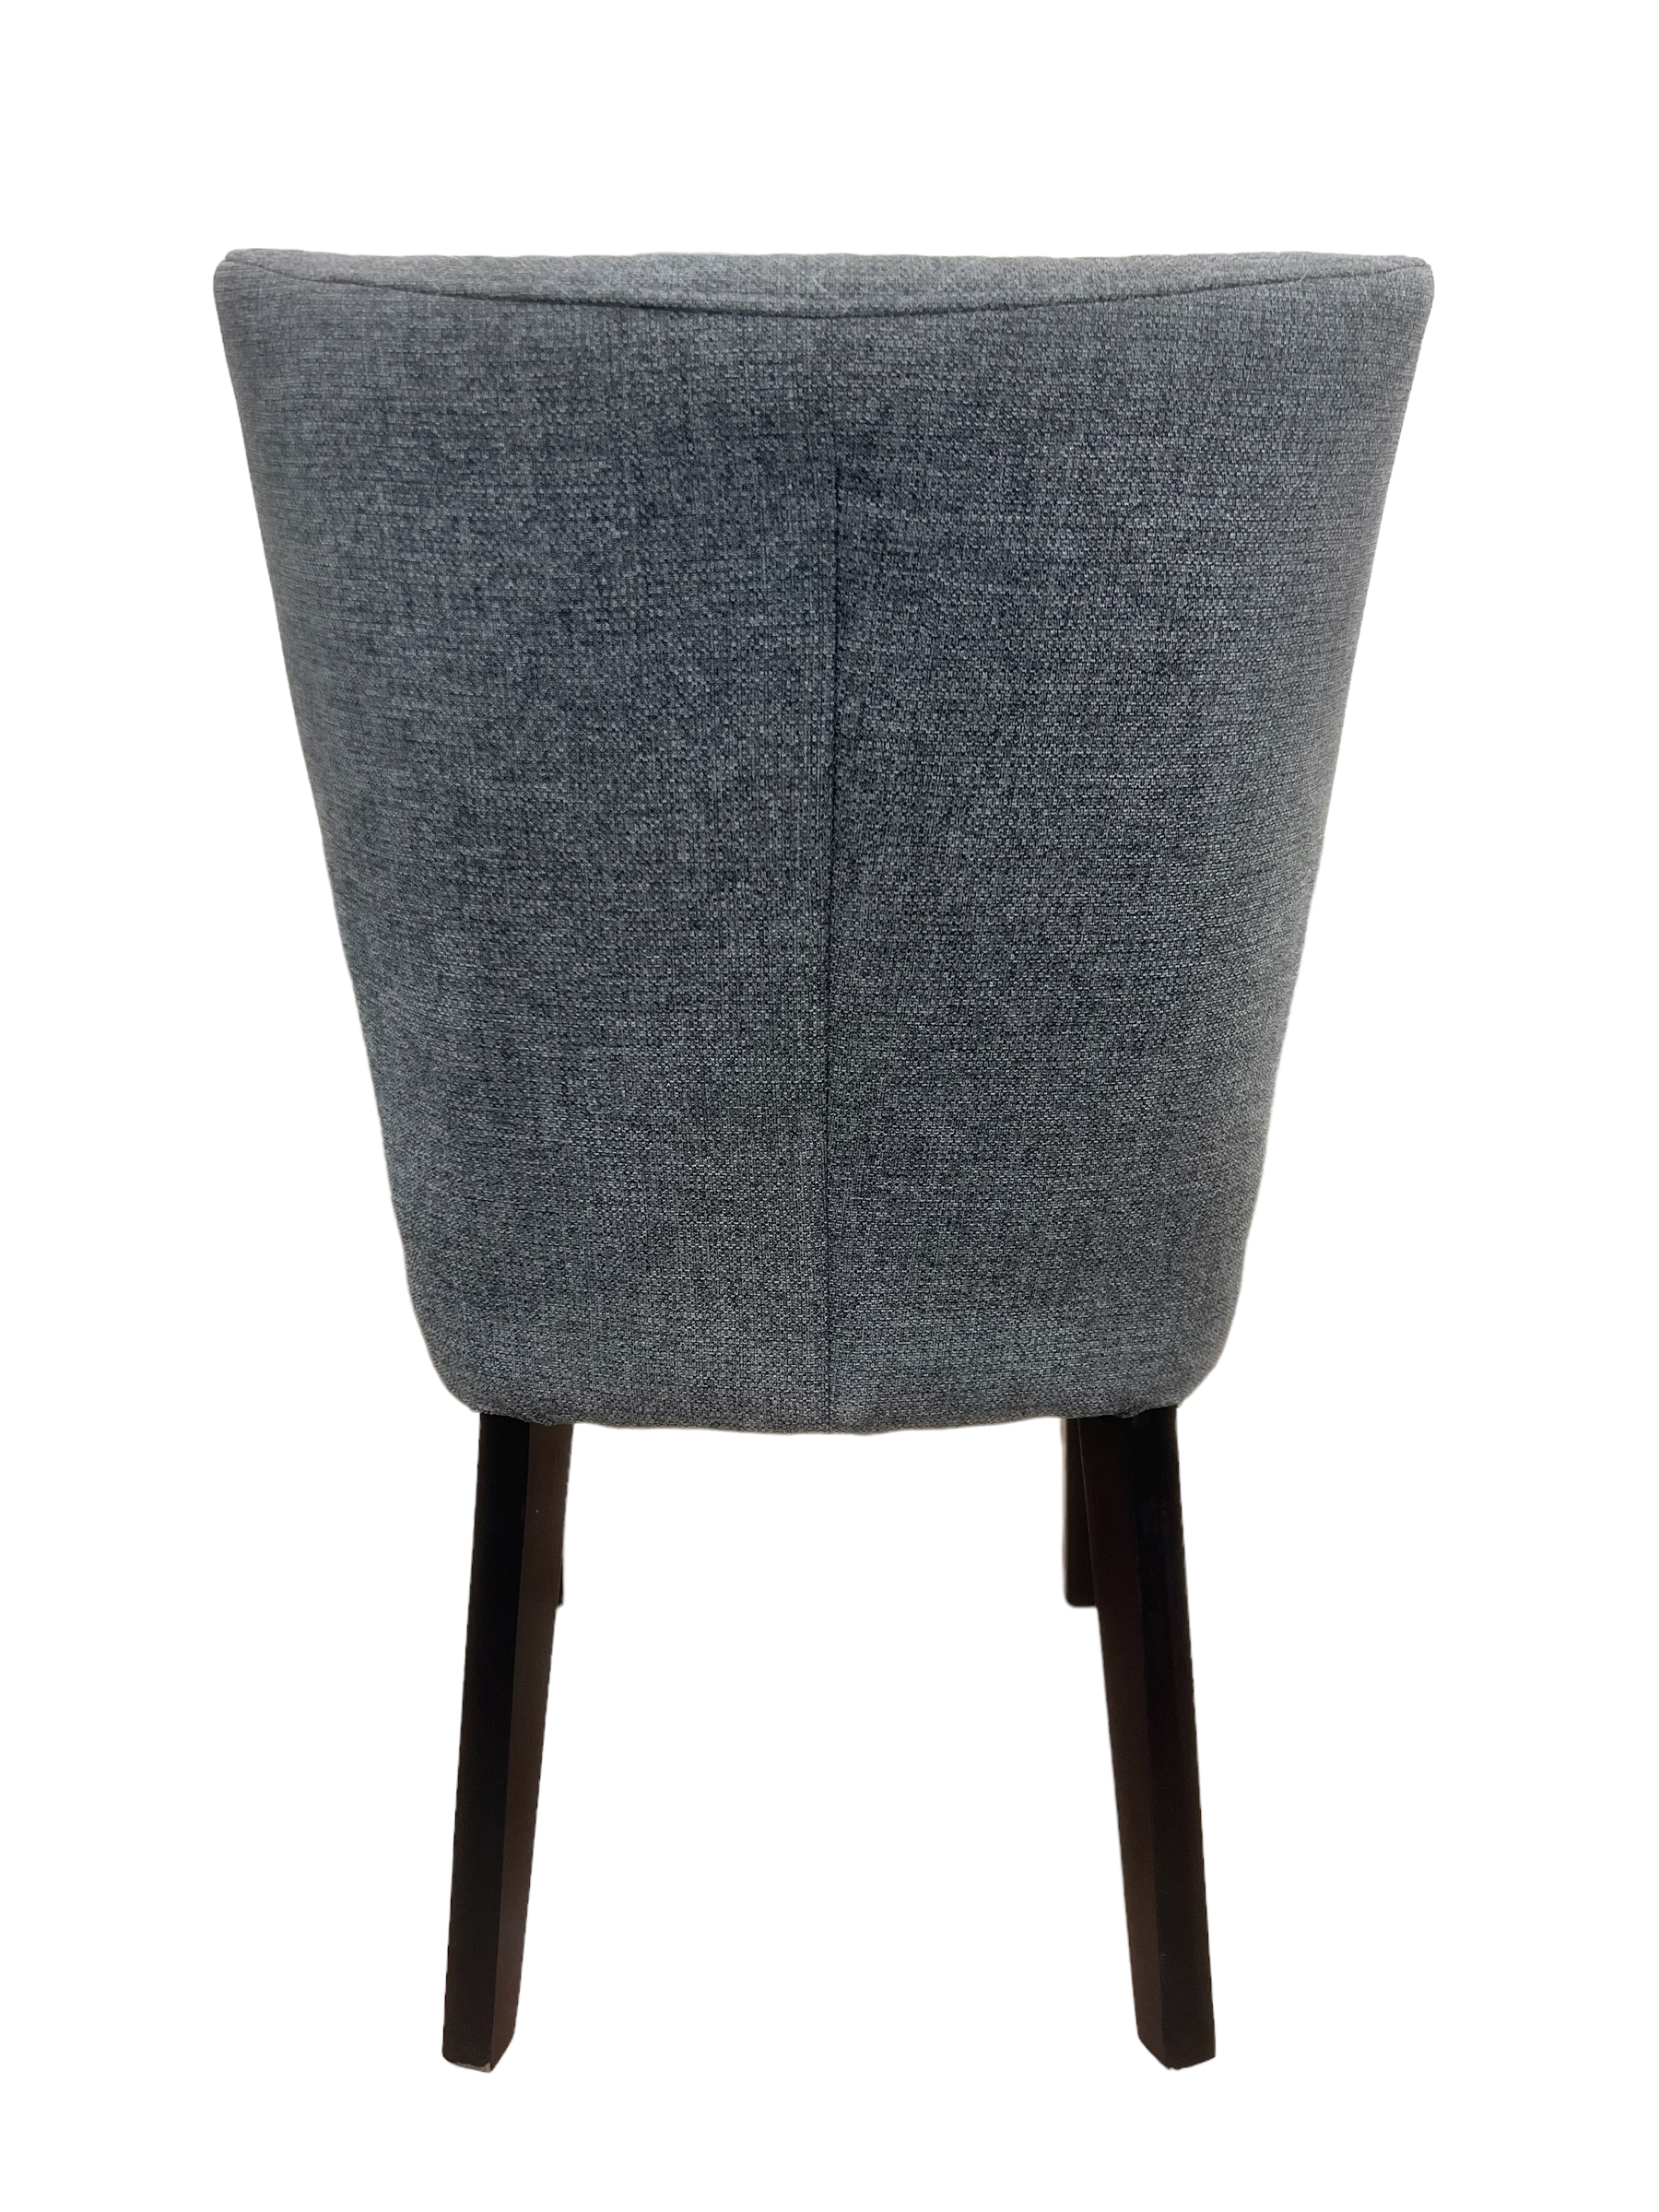 Tobago Upholster Chair In Charcoal With Black Leg